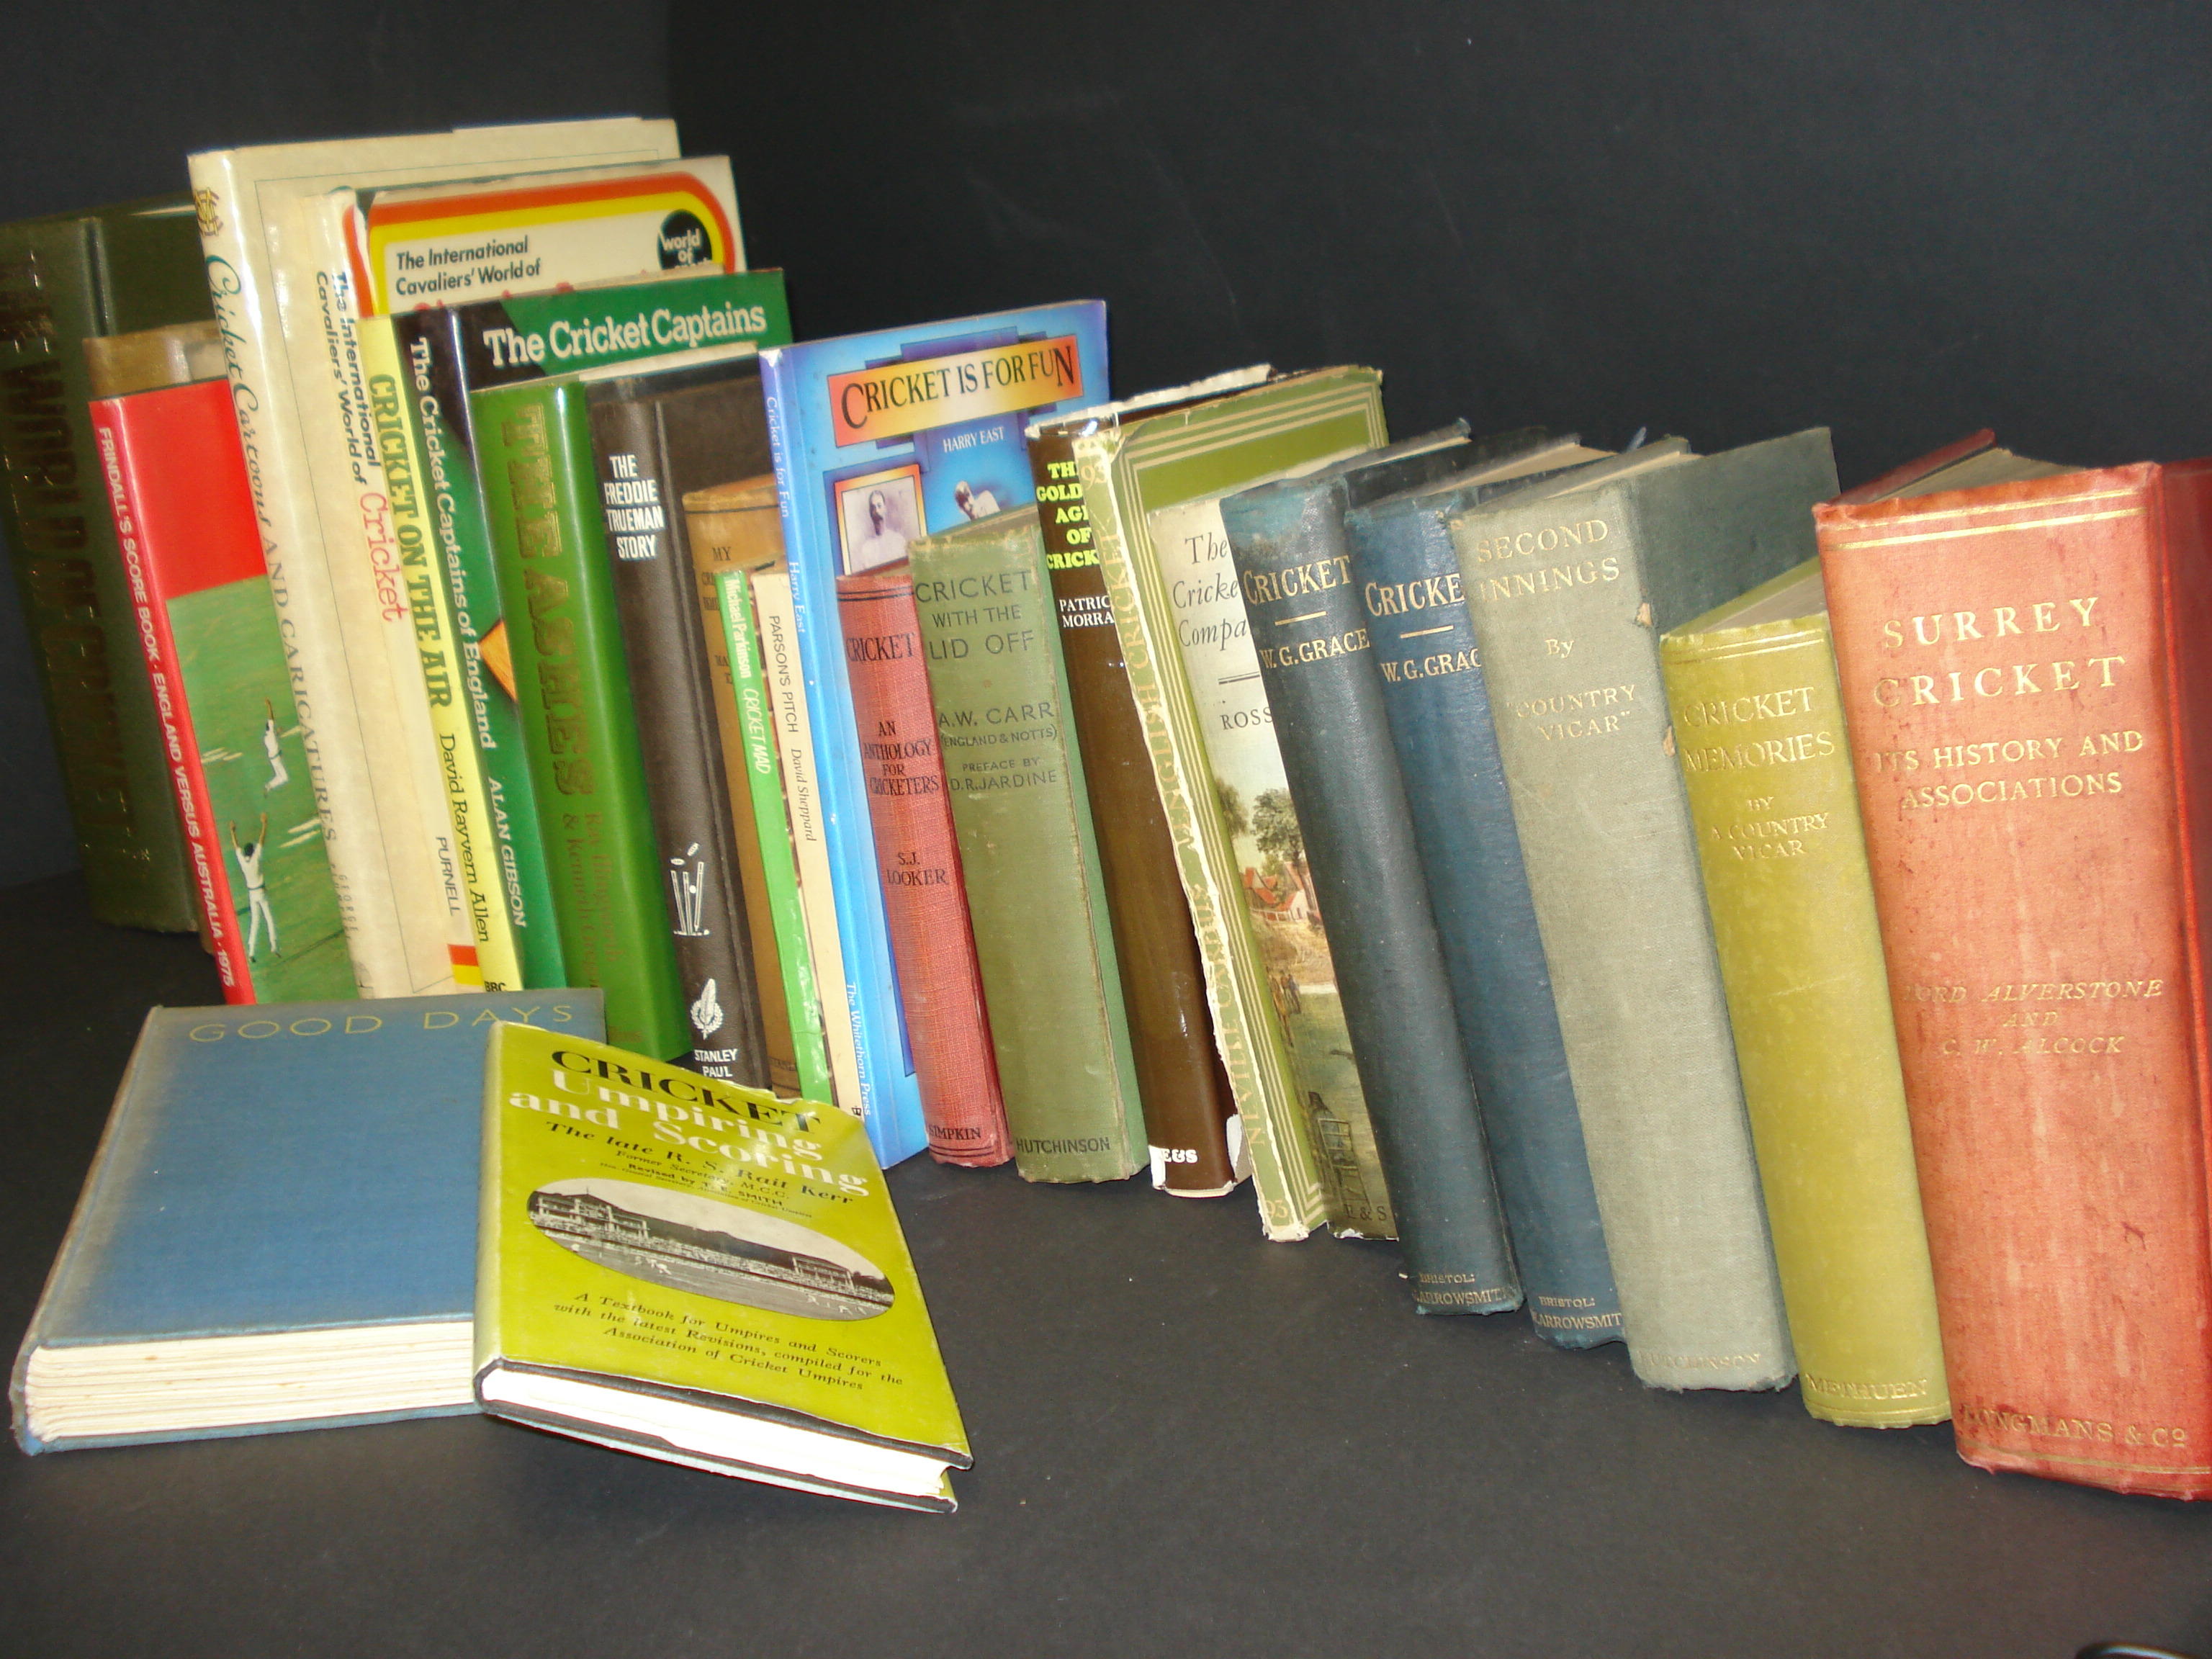 A collection of cricket books